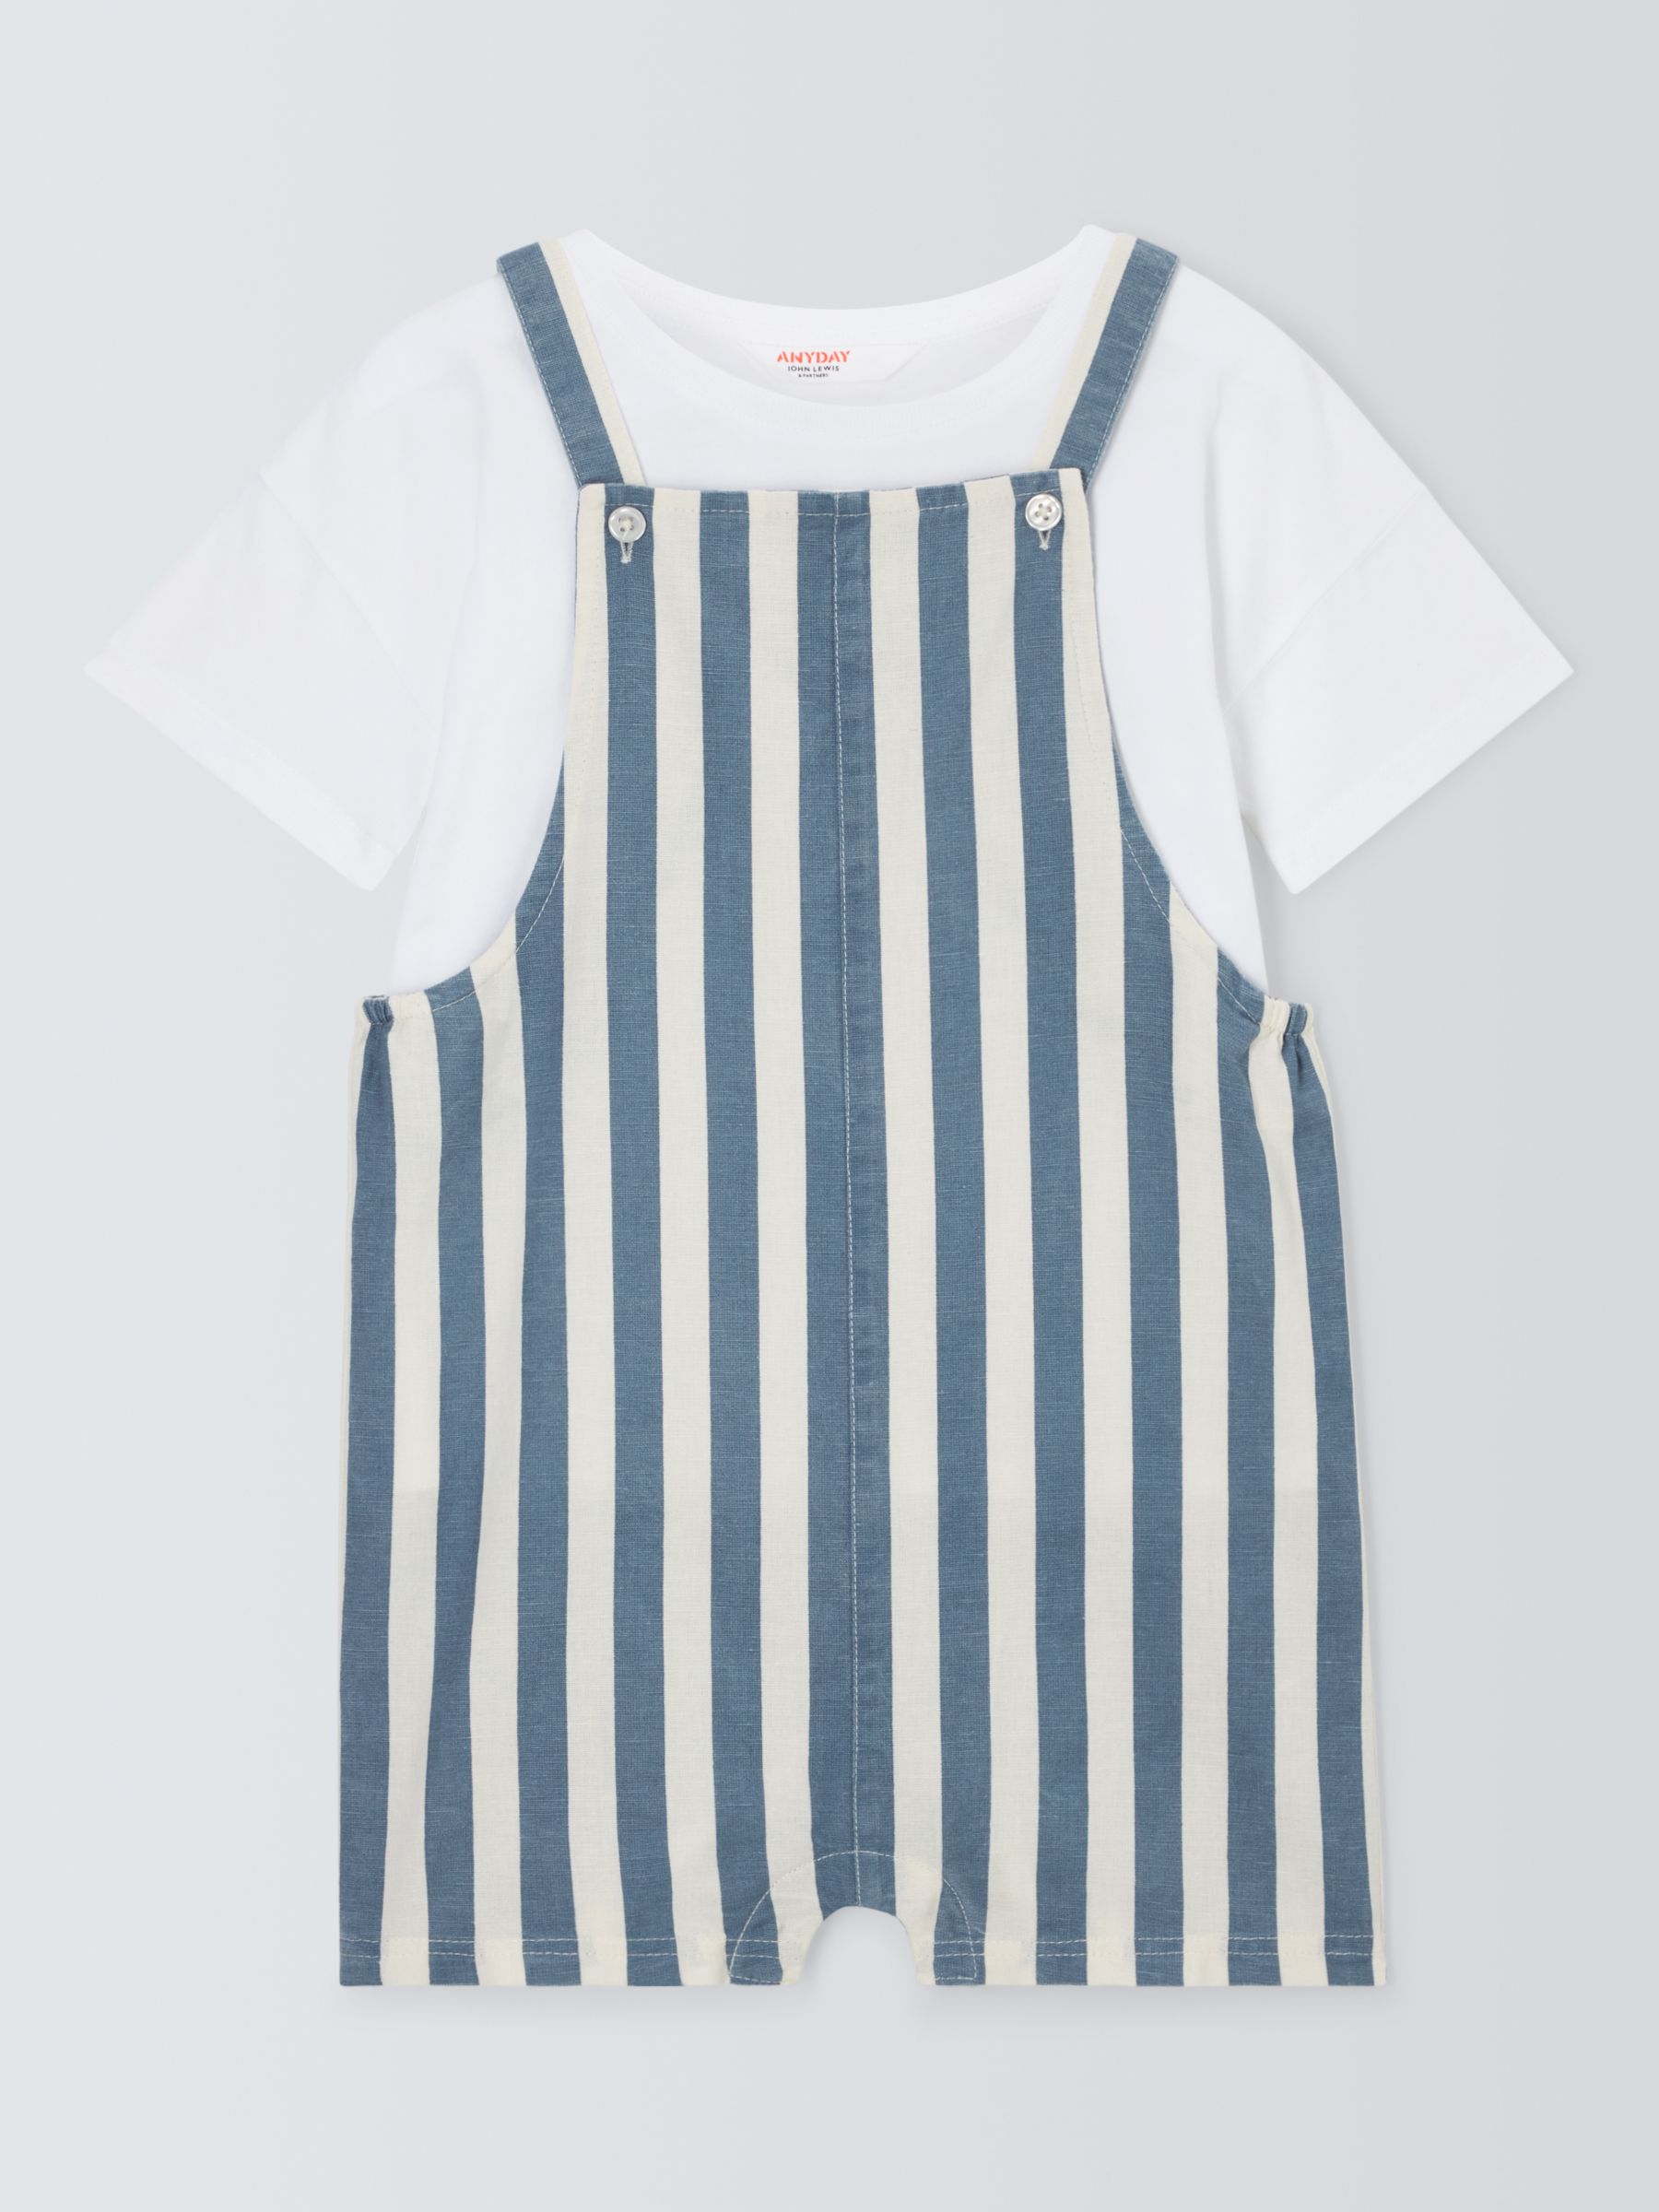 John Lewis ANYDAY Baby Cotton T-Shirt and Linen Blend Stripe Dungarees, Blue, 9-12 months